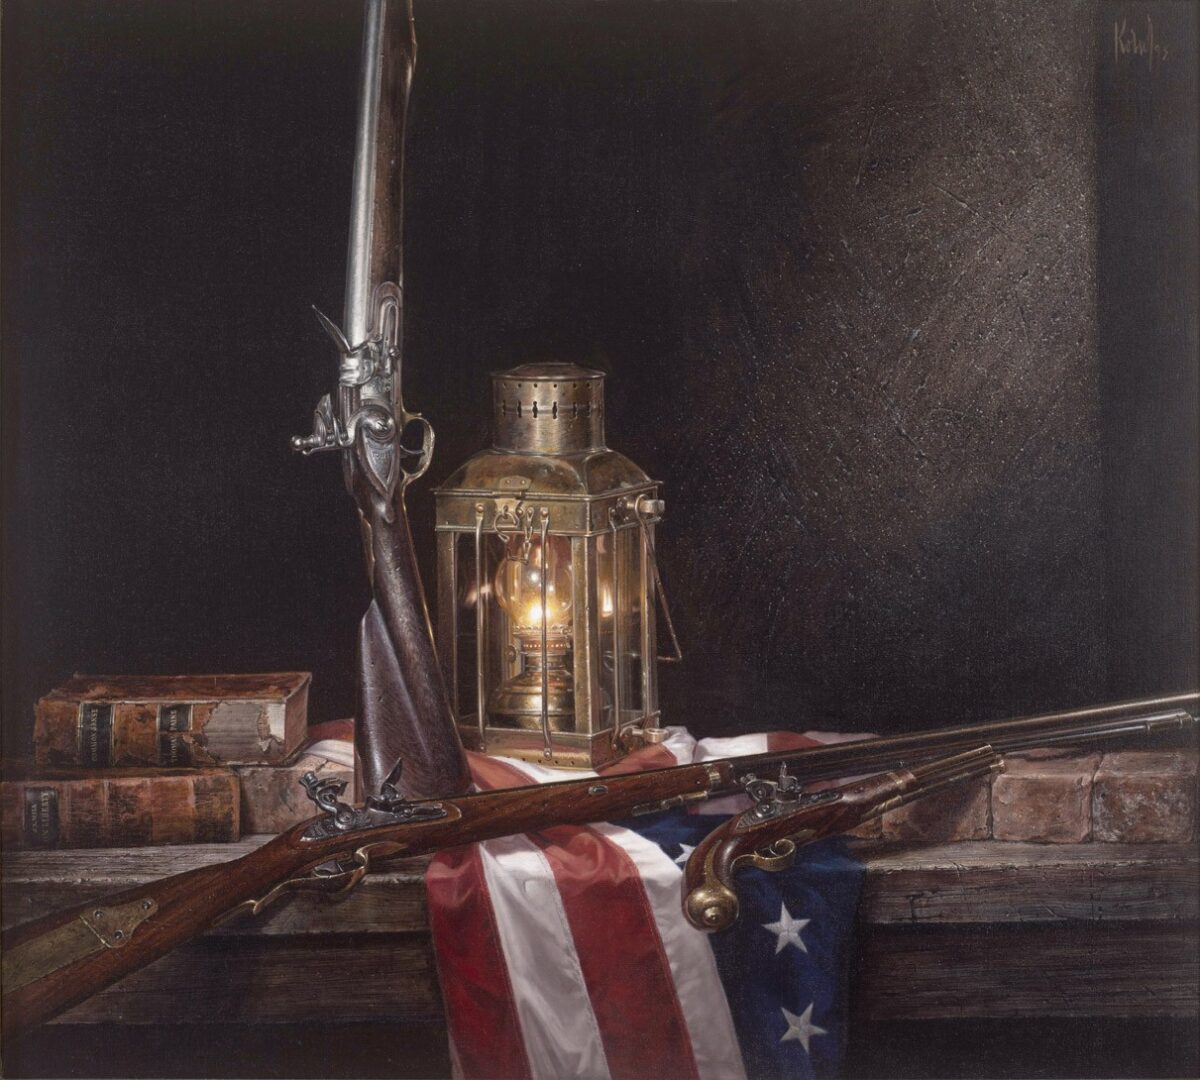 A painting of an american flag with rifles and books.